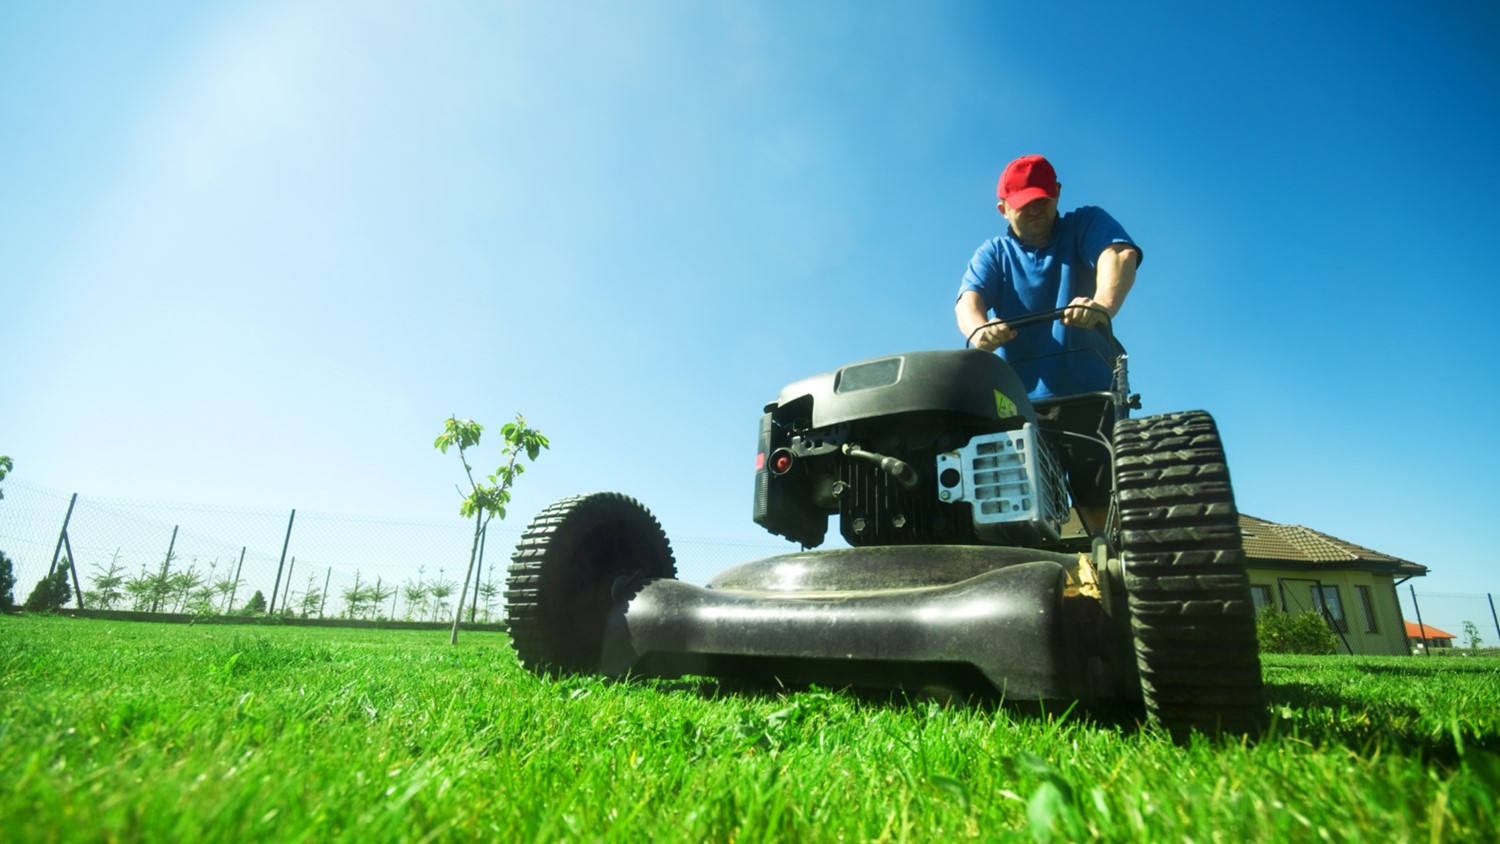 Lawn Care Services in Parkville